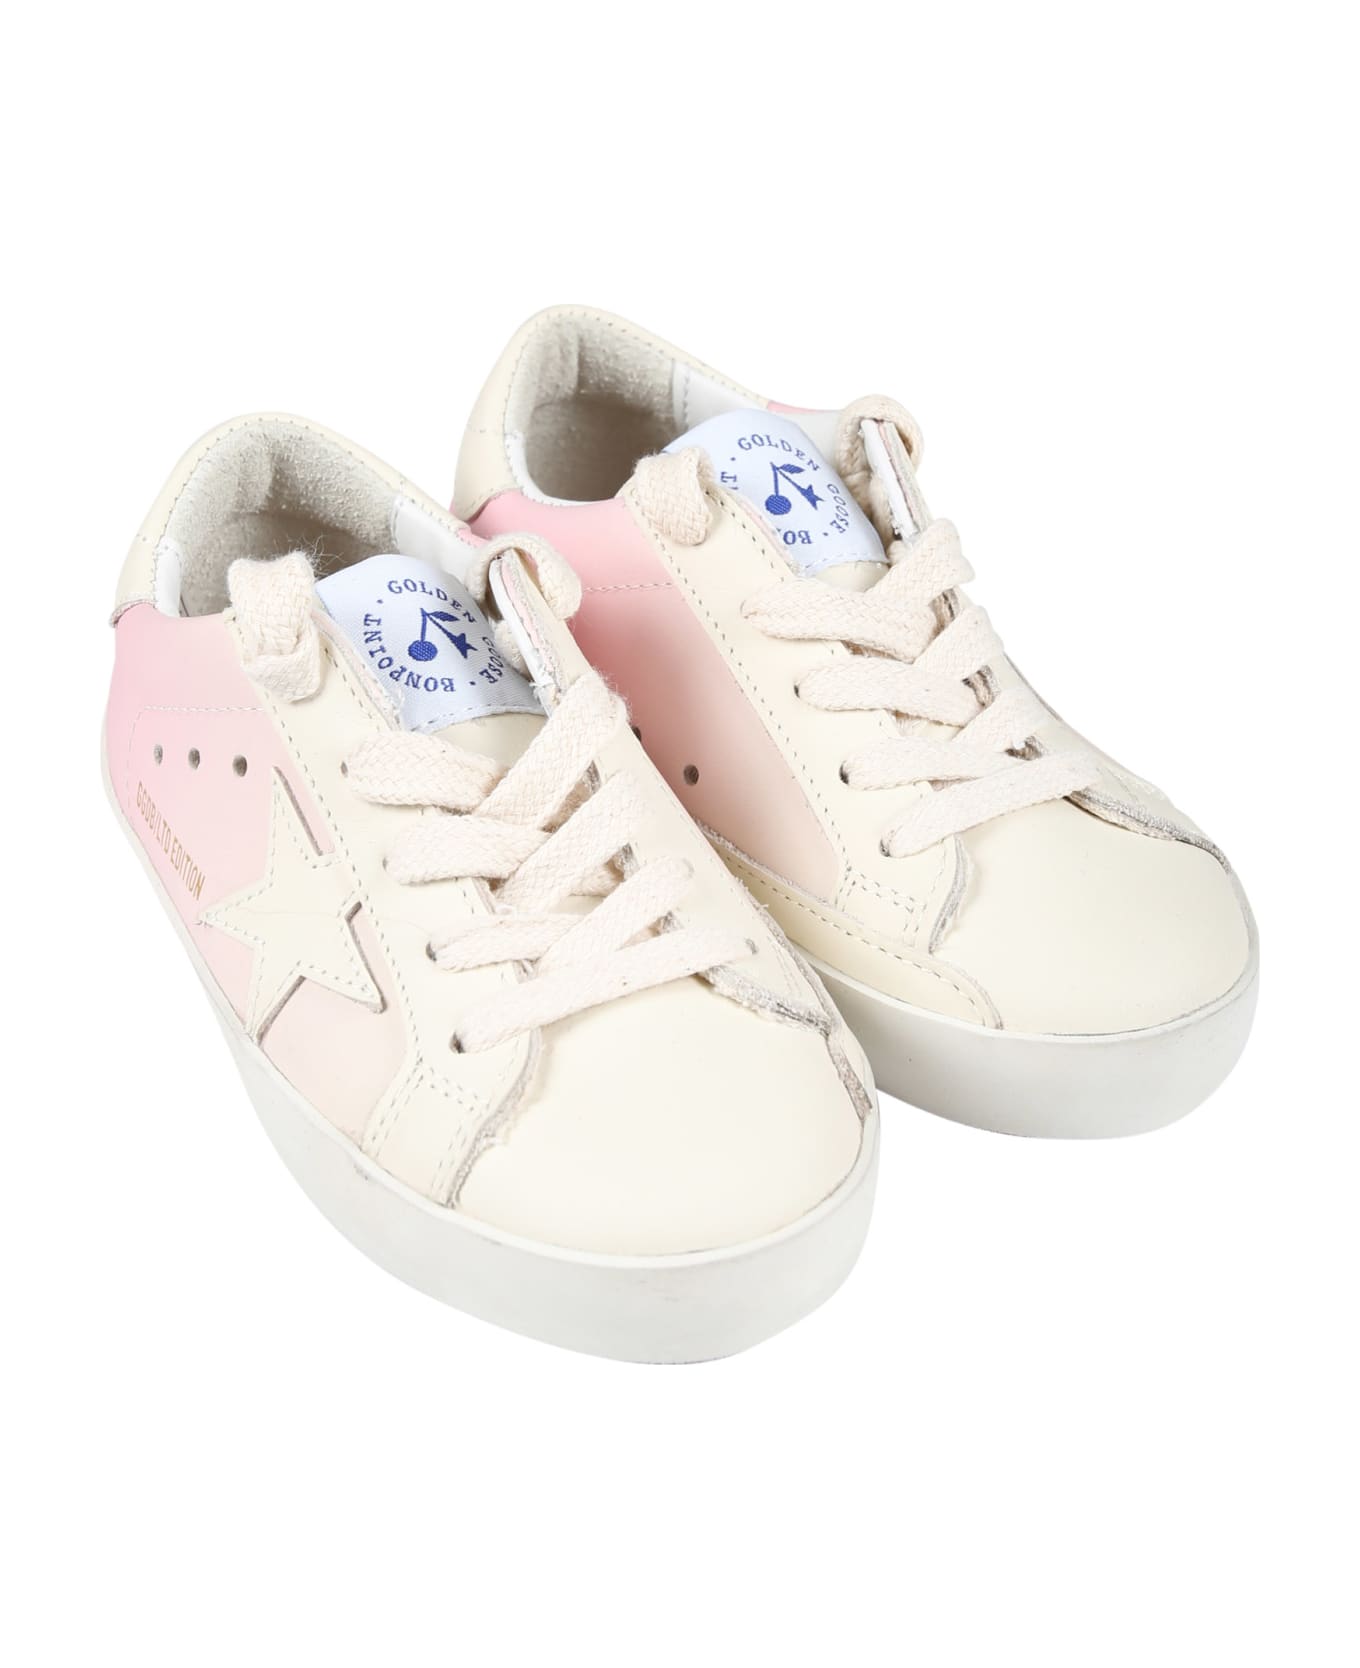 Bonpoint Pink Sneakers For Girl With Star - Pink シューズ